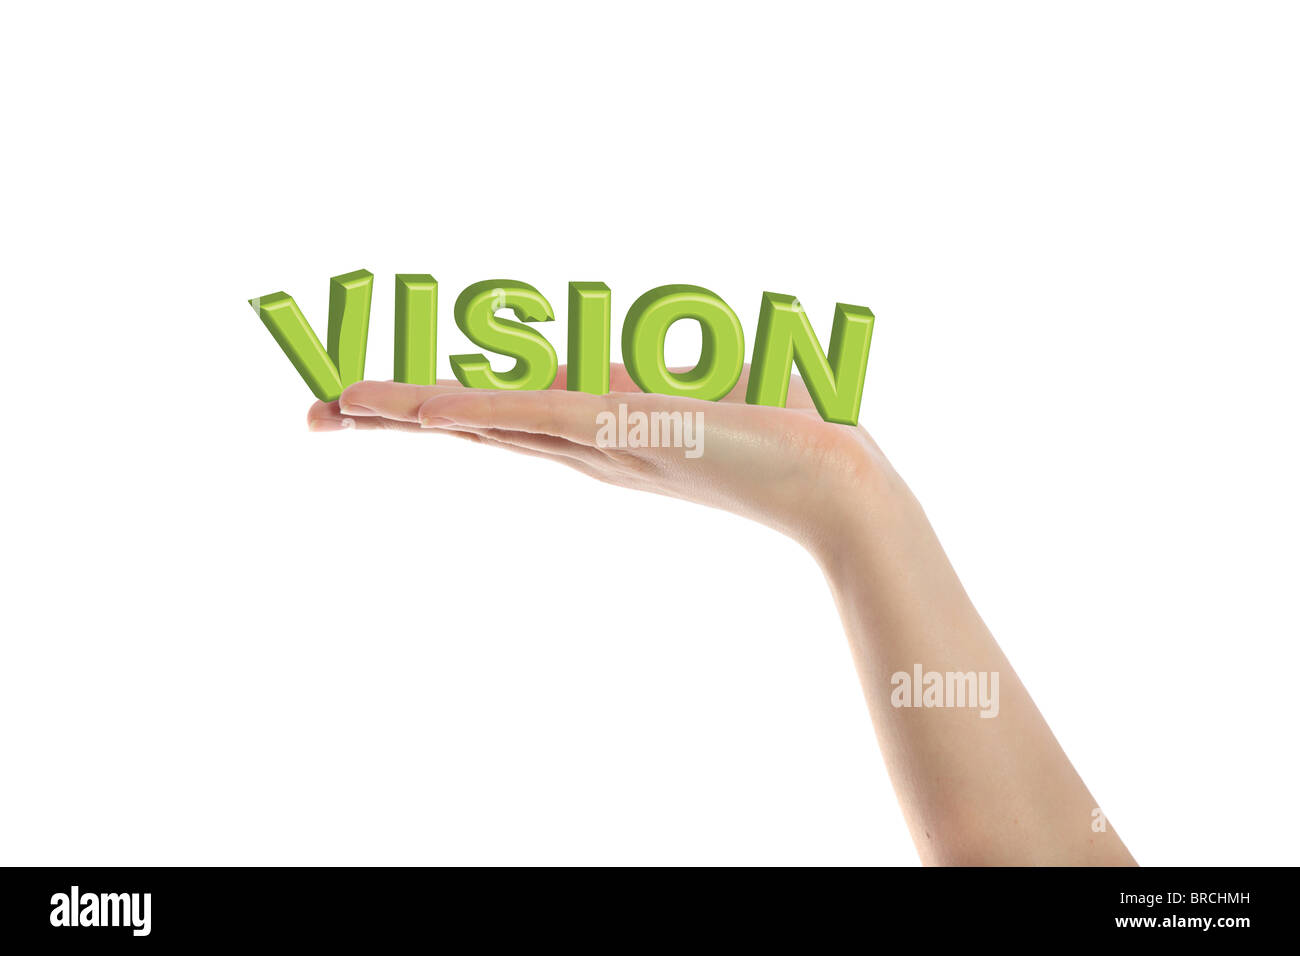 A neat human hand holding the word vision. All isolated on white background. Stock Photo